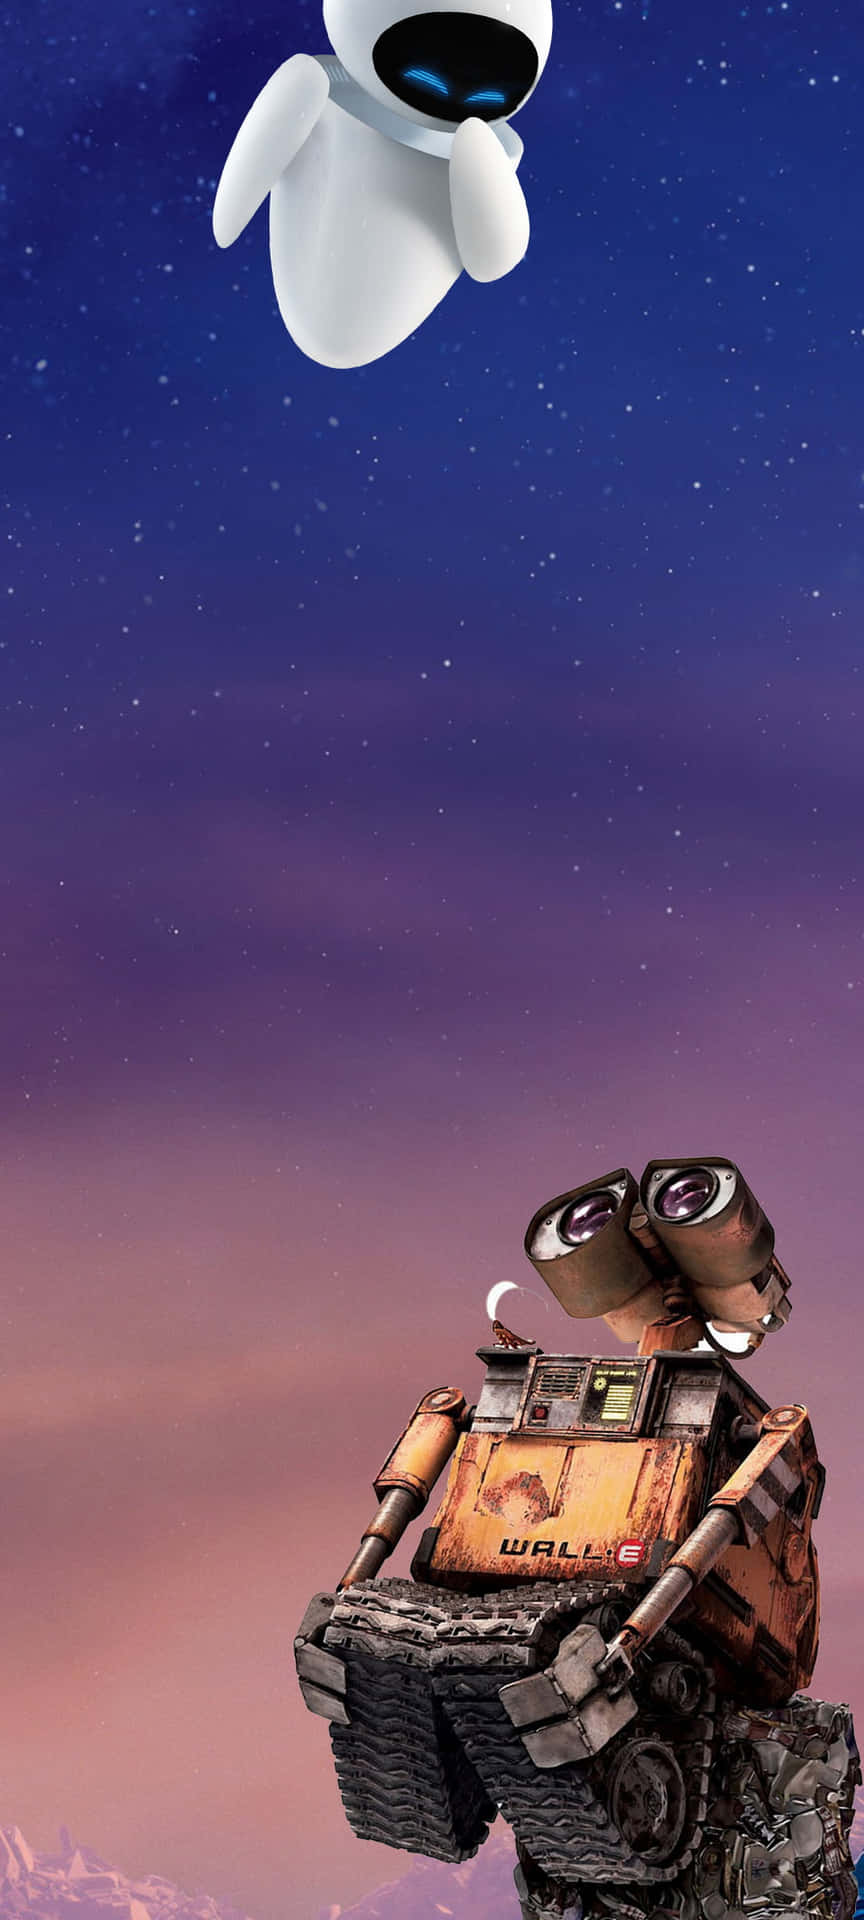 Wall E - The Movie Poster Wallpaper